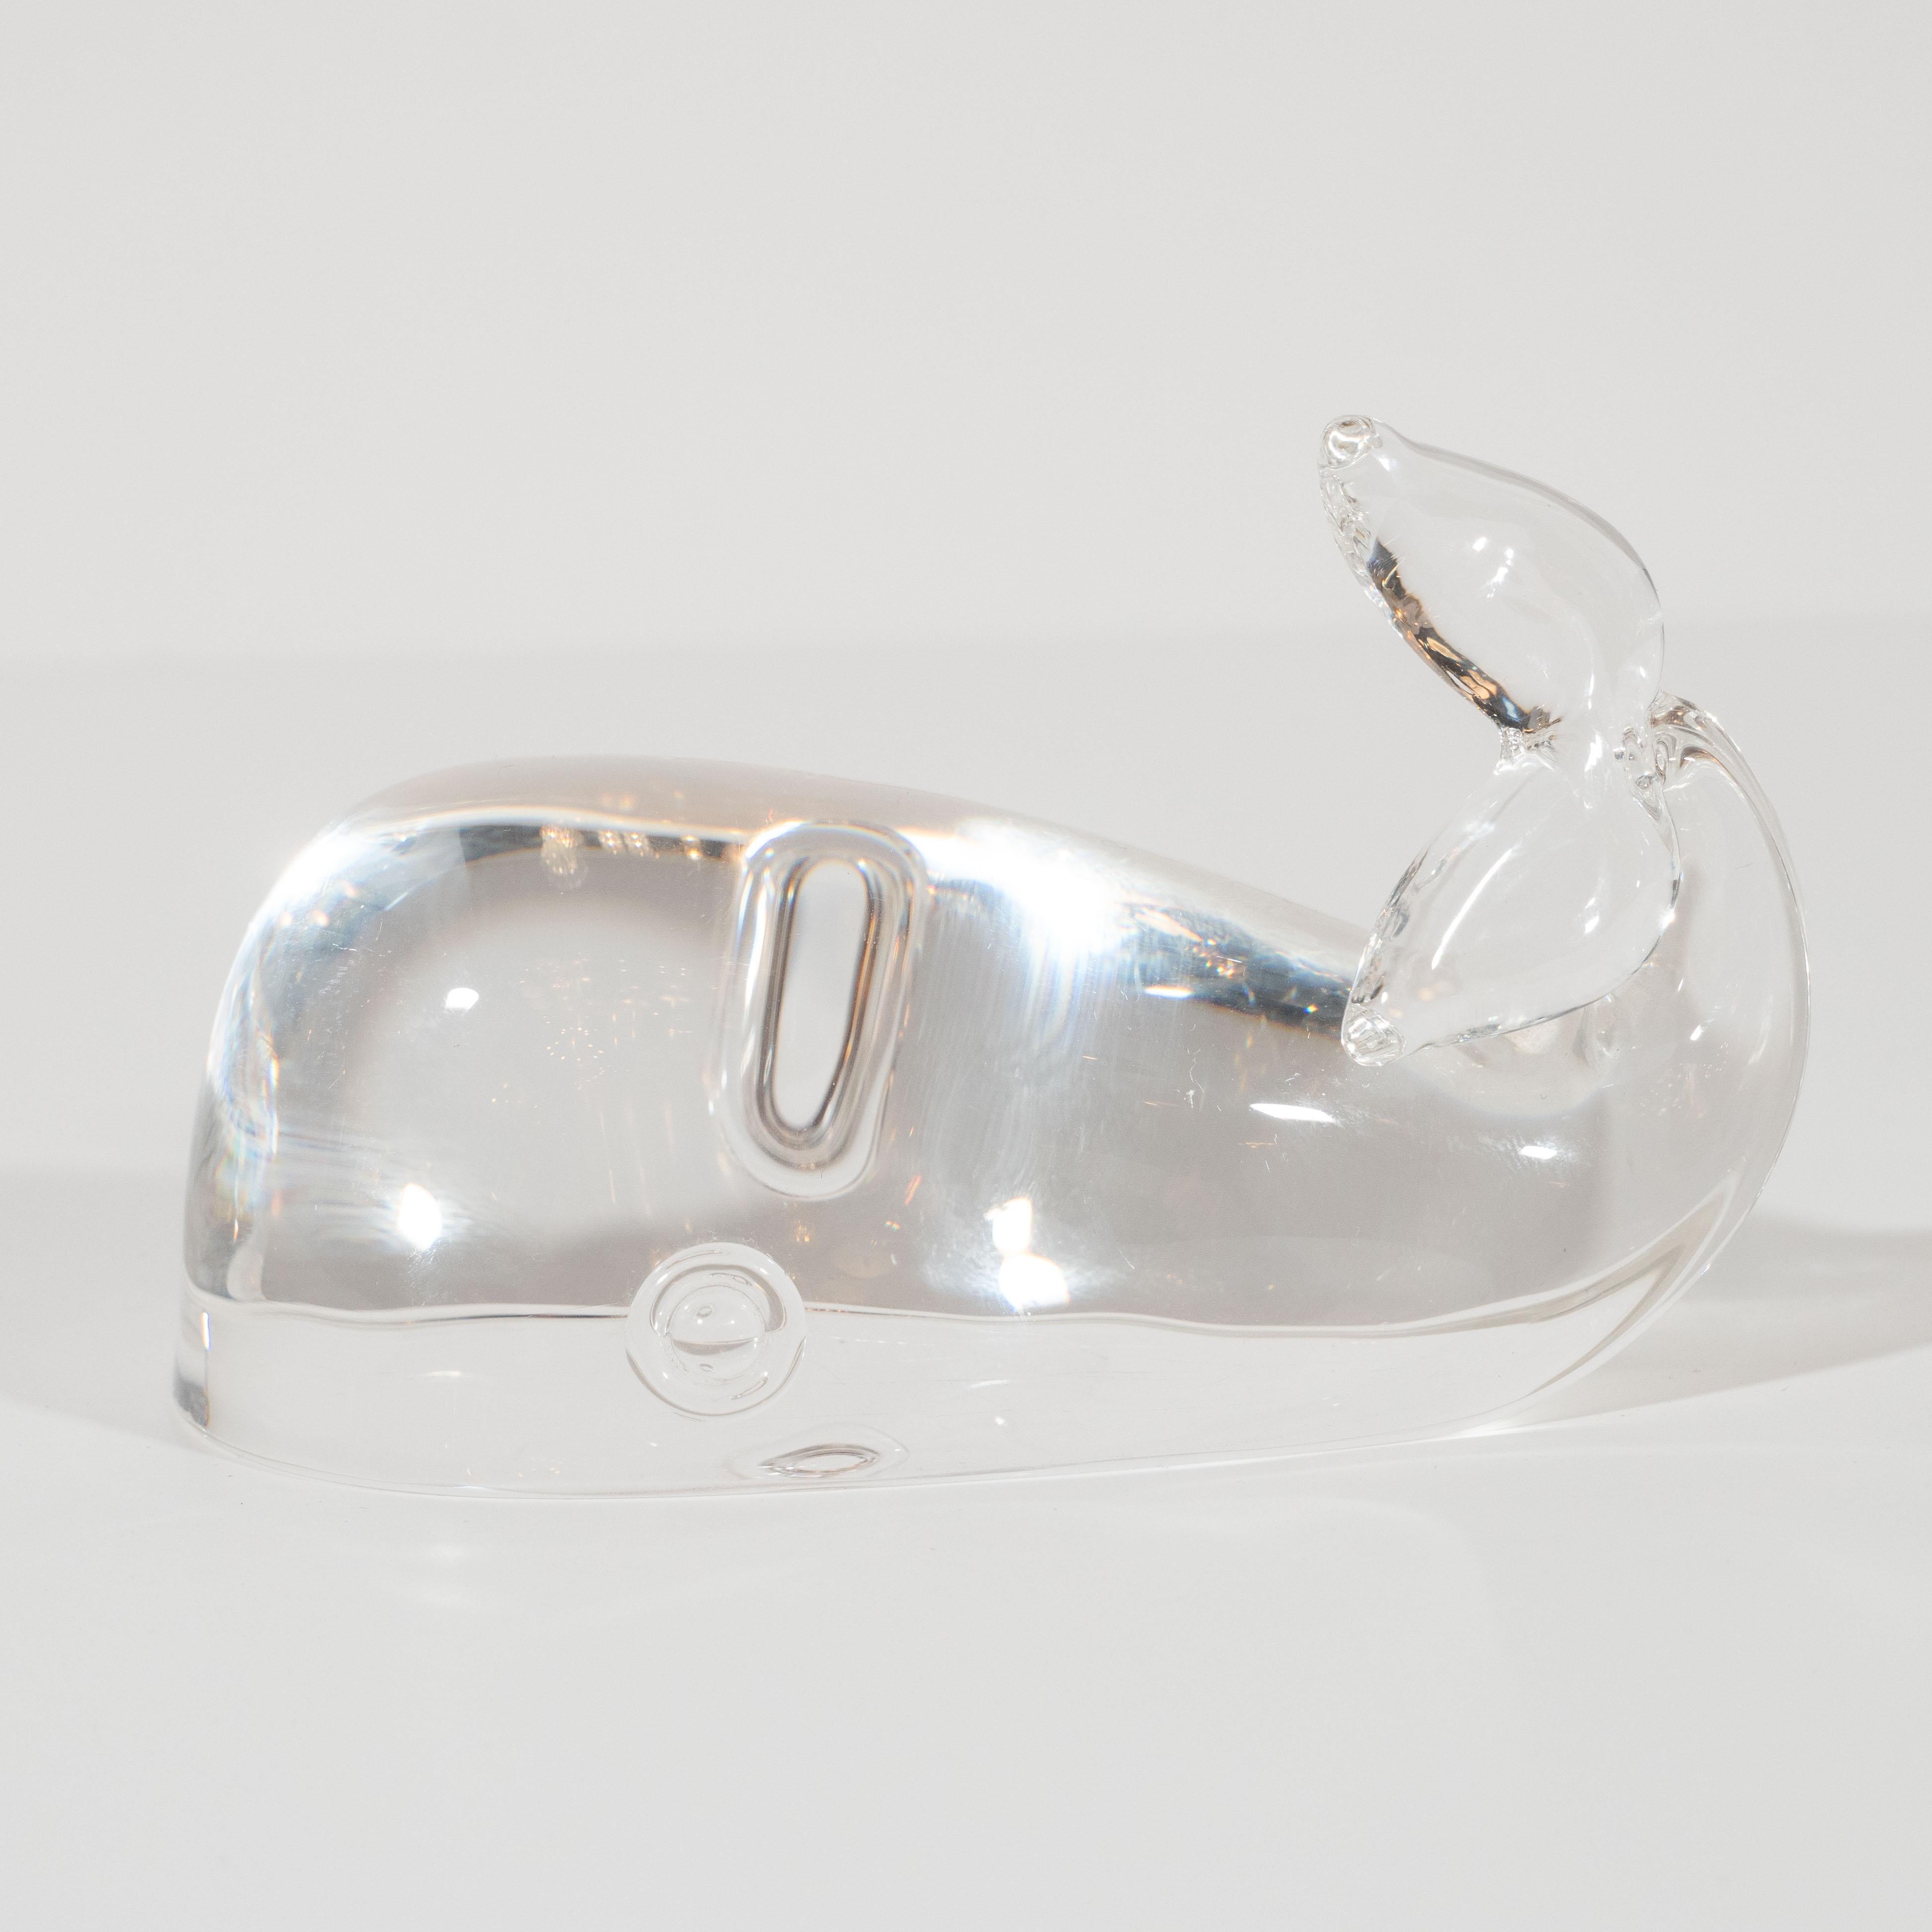 Mid-20th Century Mid-Century Modern Translucent Glass Beluga Whale Paperweight by Steuben